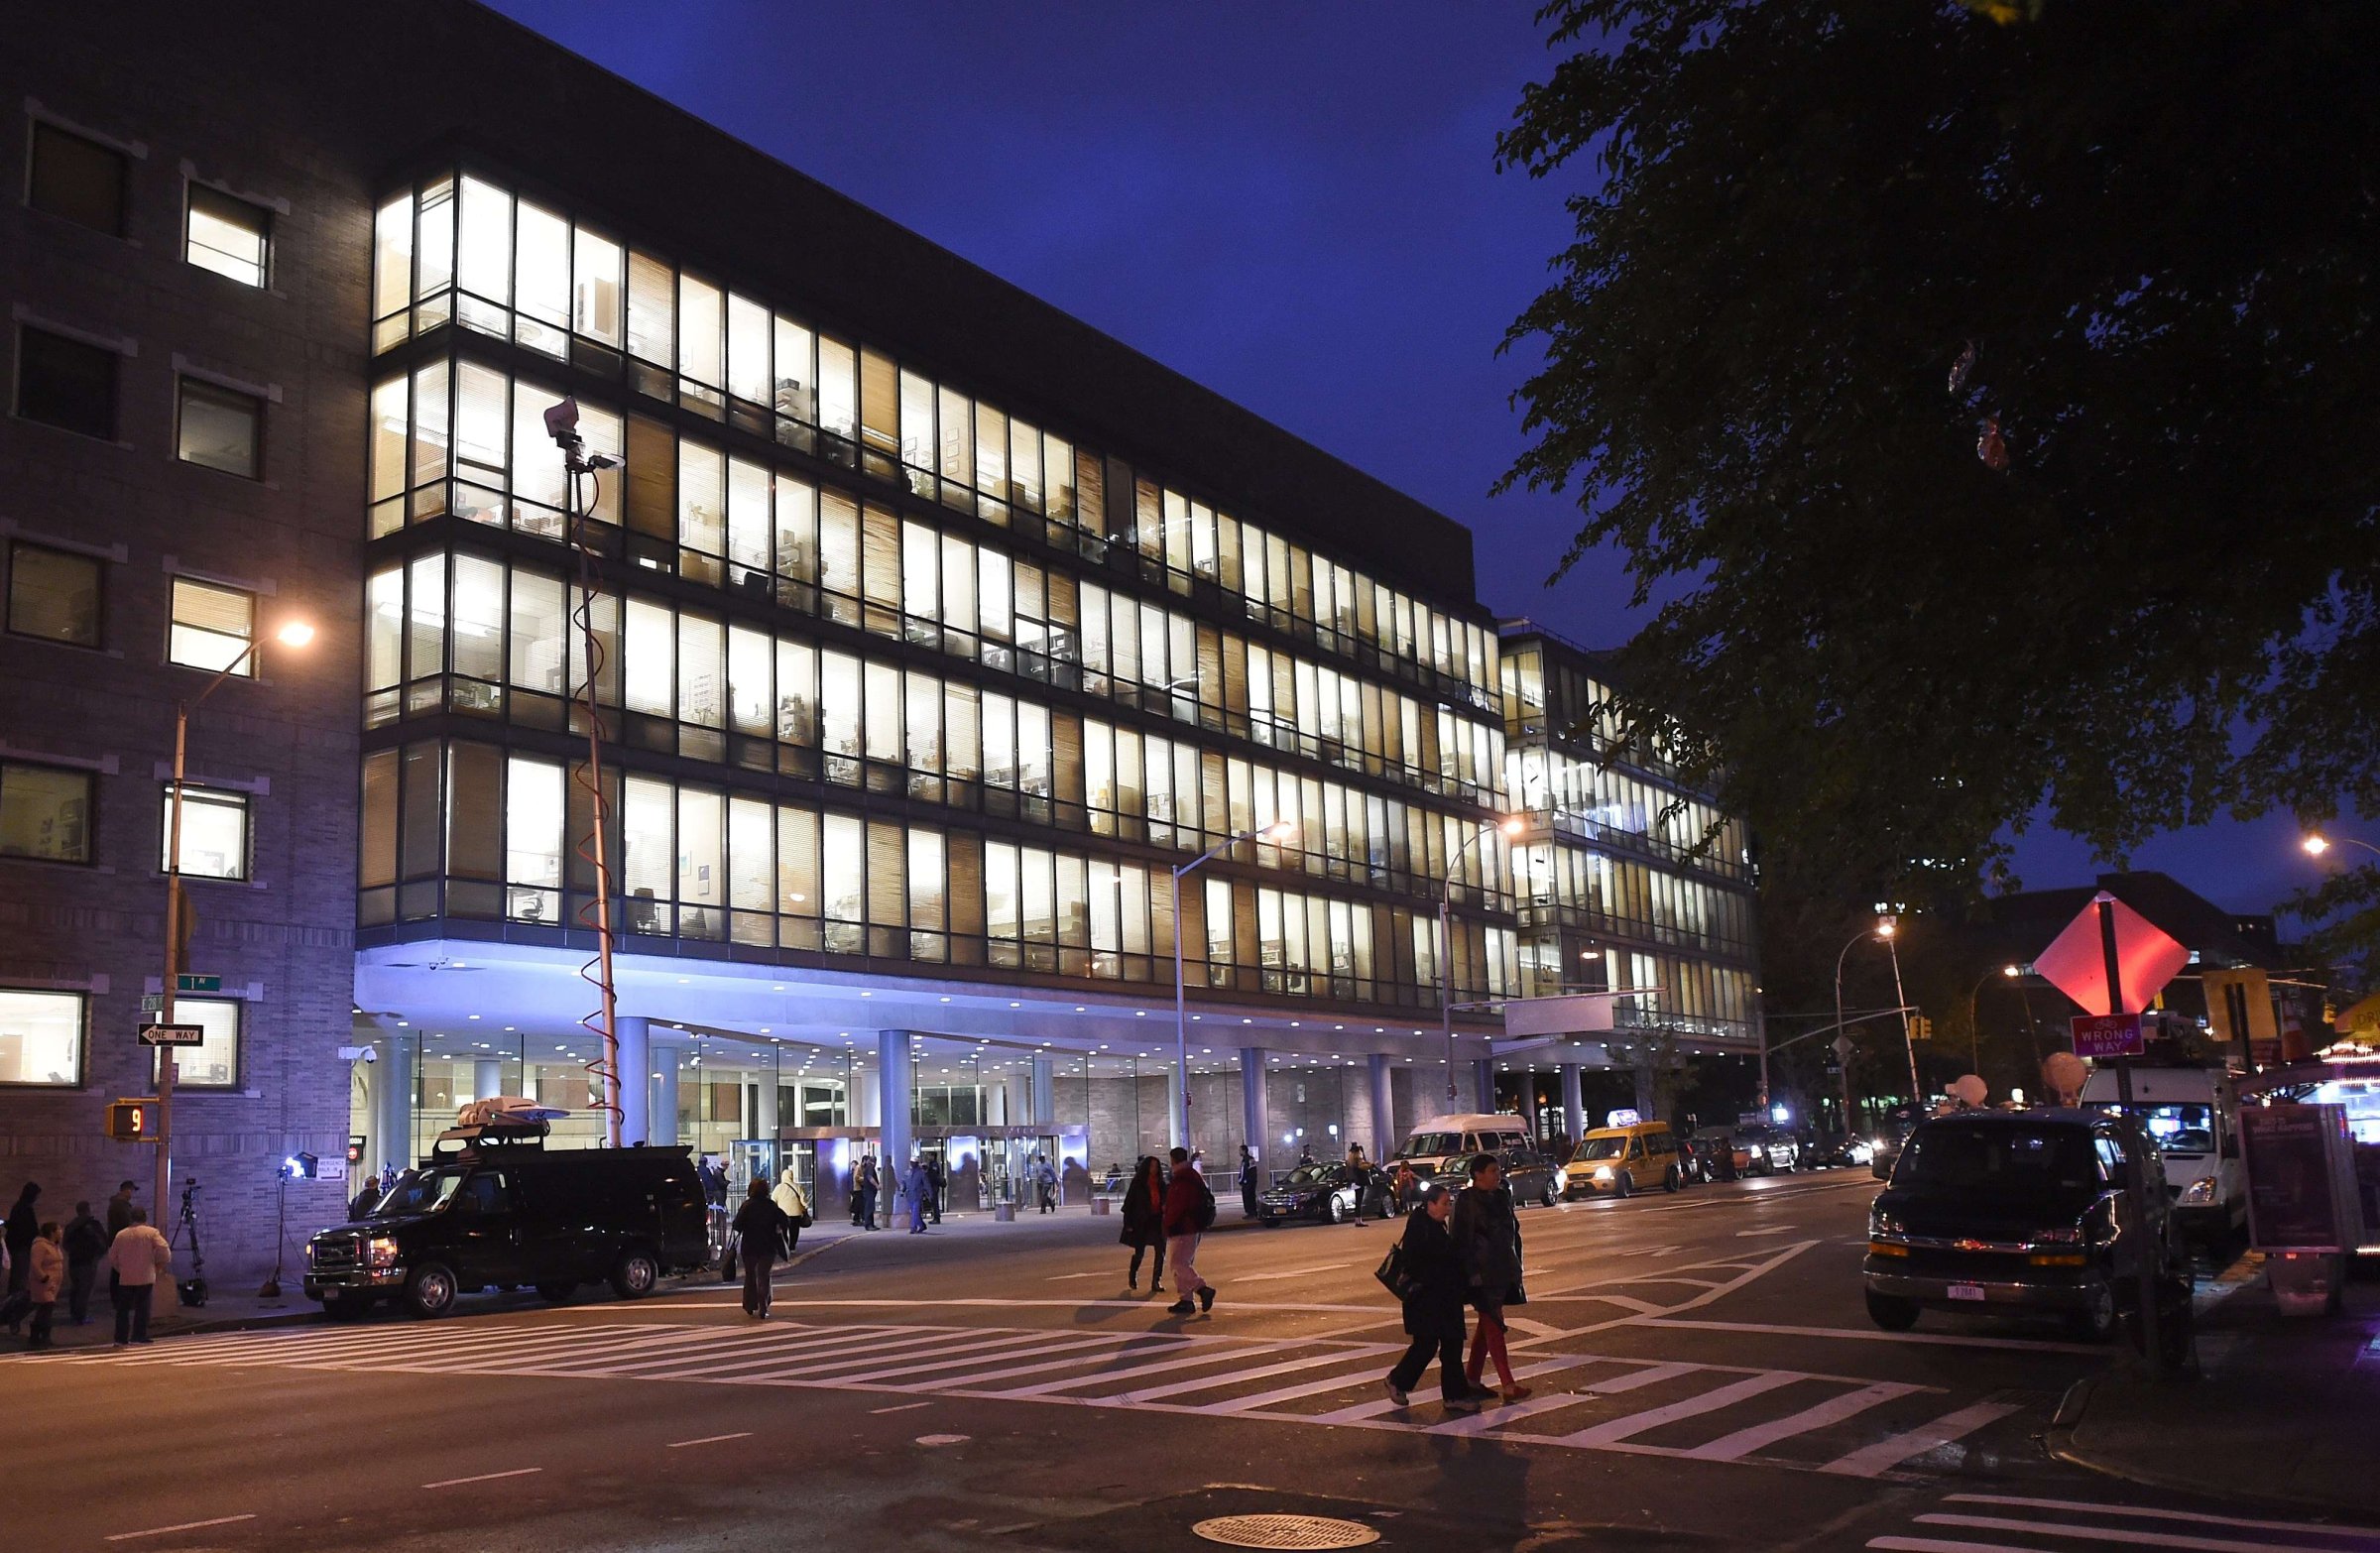 The entrance to Bellevue Hospital on Oct. 23, 2014 after a doctor who recently returned to New York from West Africa was rushed with a fever t o be tested for possible Ebola, the city's health department said.